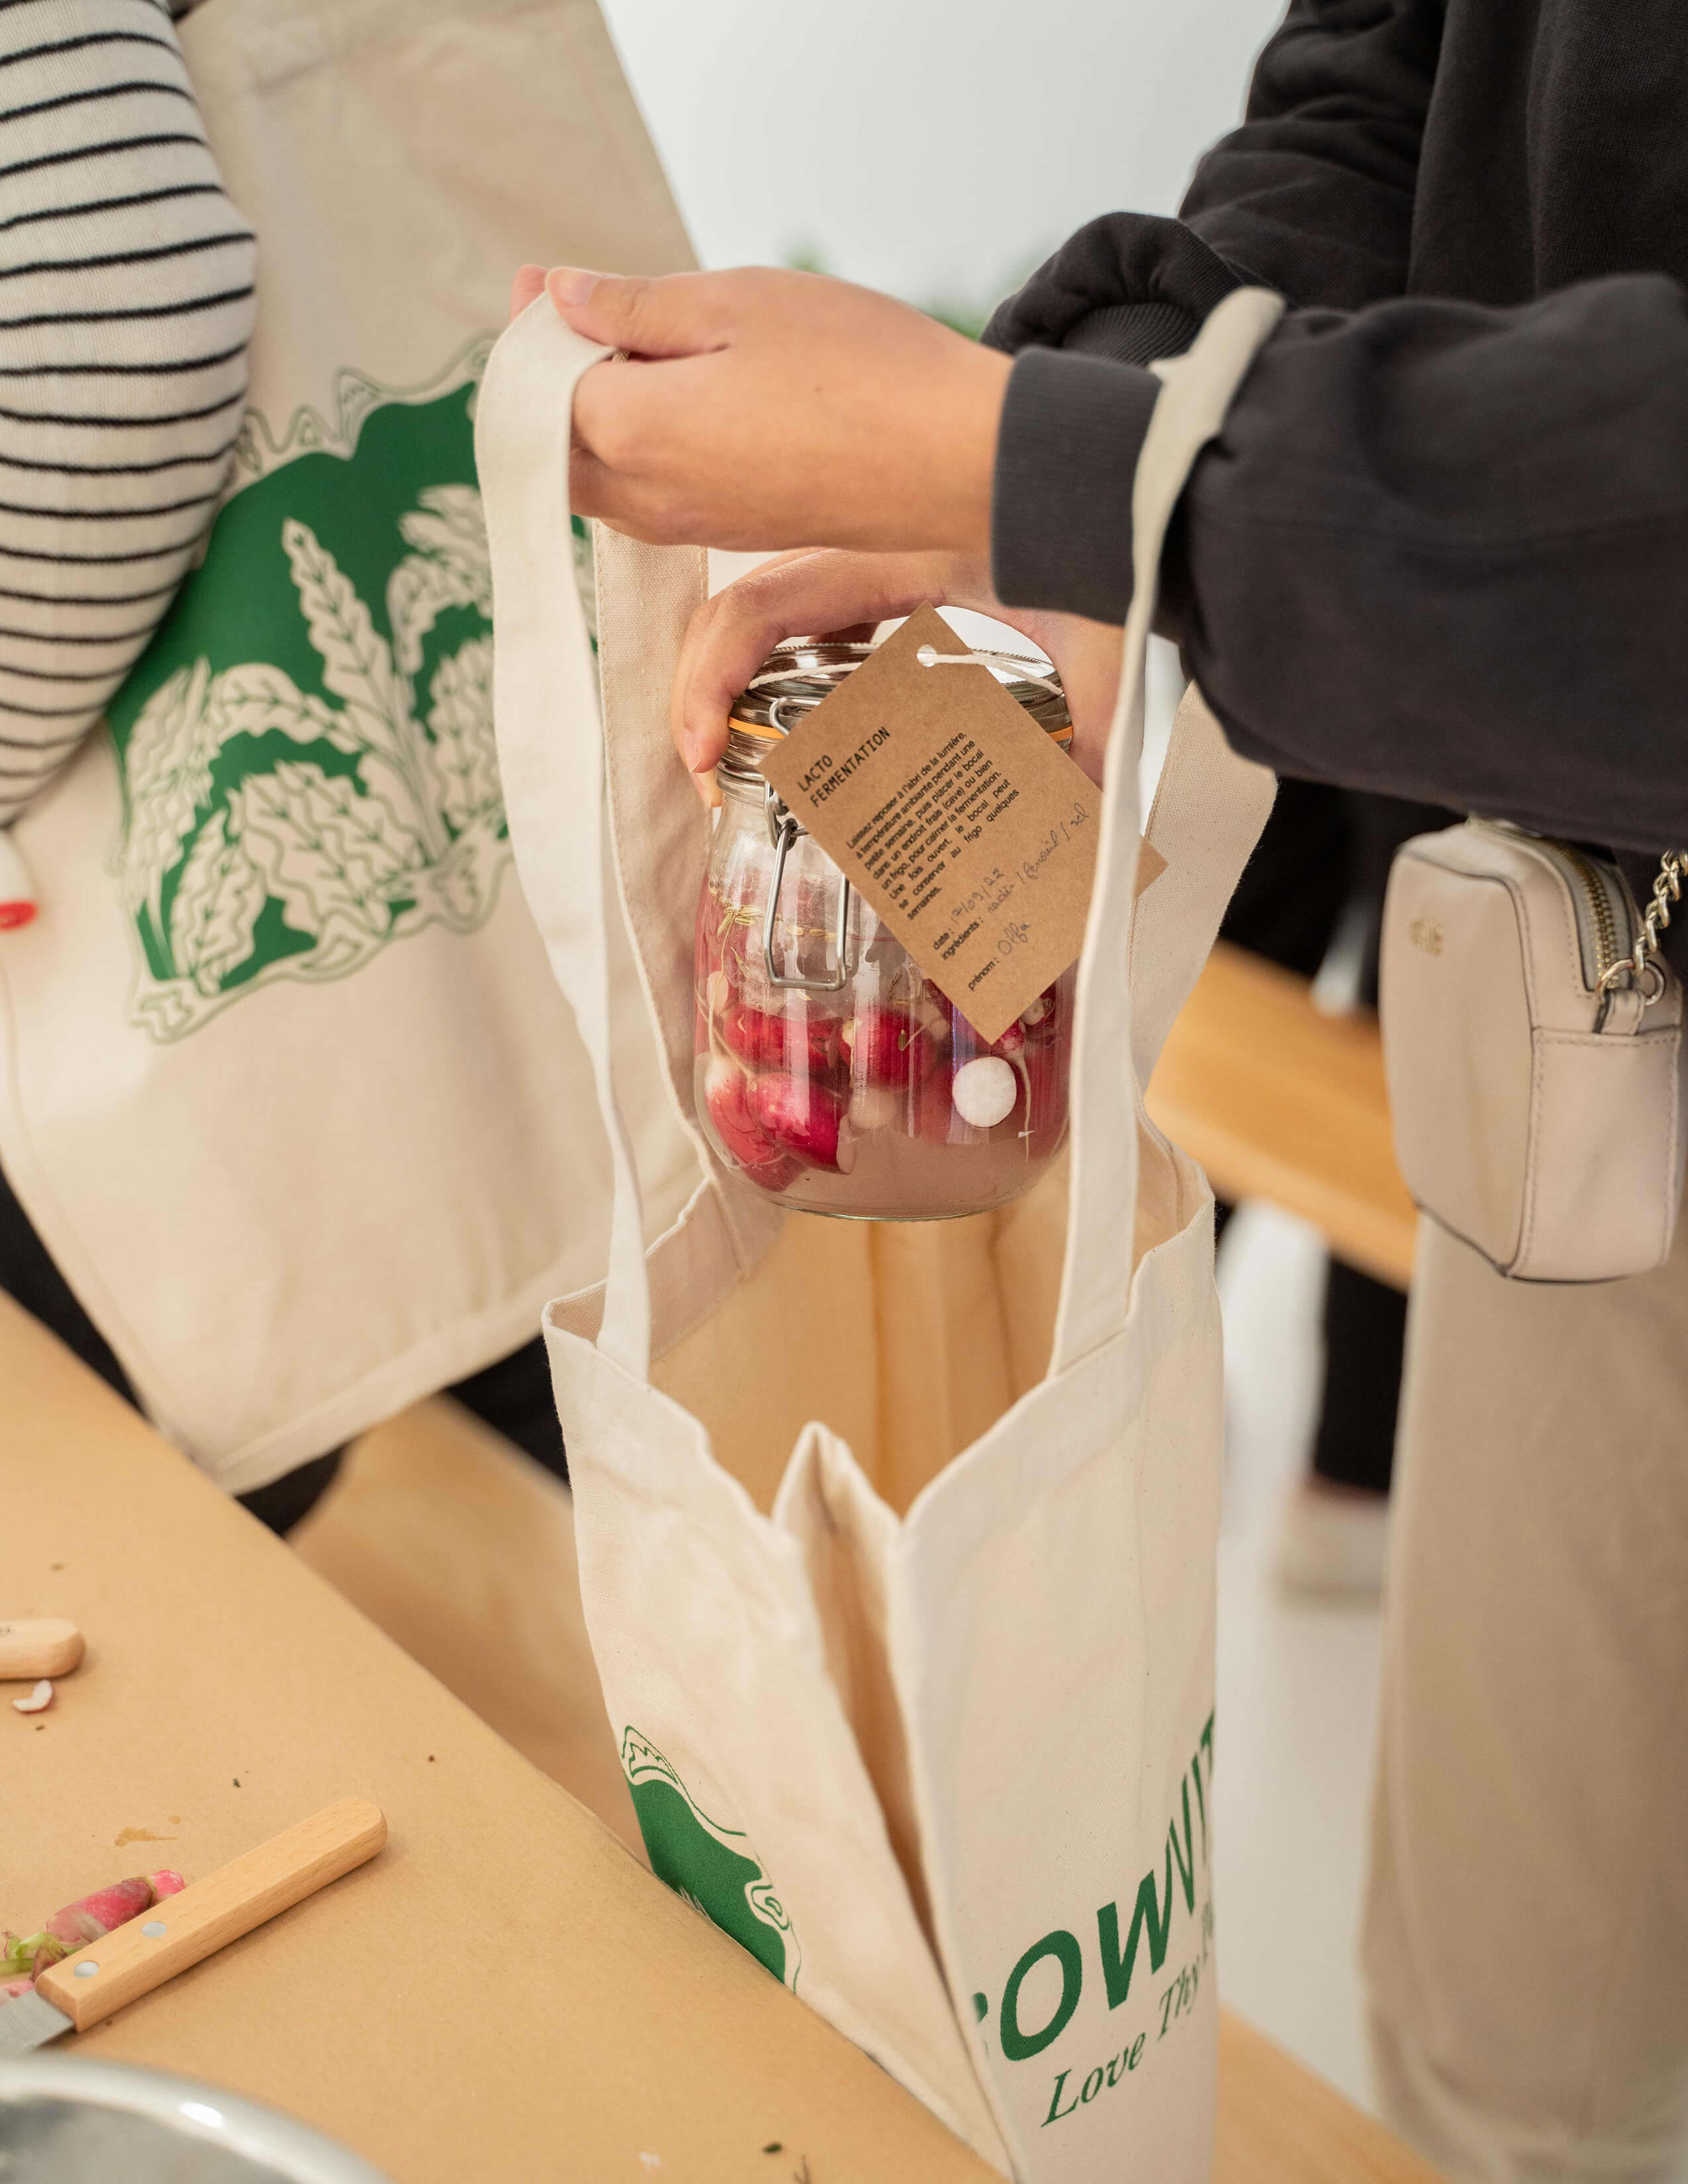 A person puts the jar containing fermented ingredients in the tote bag that is labelled with the Sowvital brand on it.